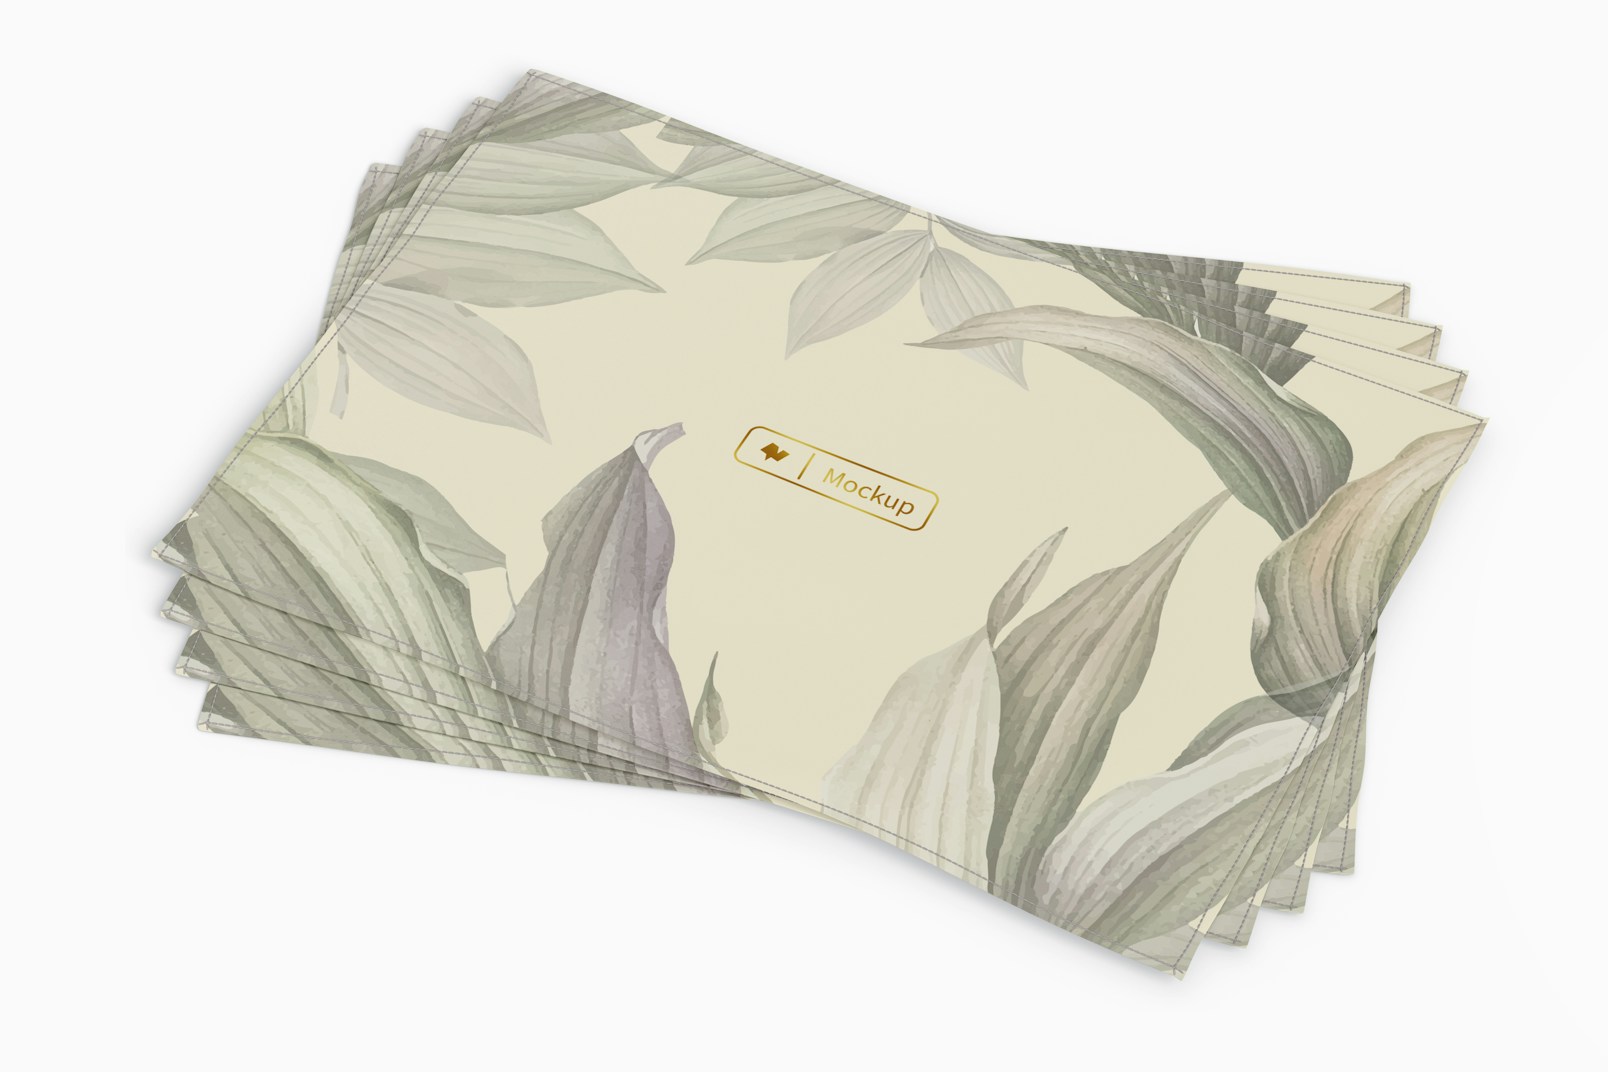 Fabric Placemat Mockup, Stacked